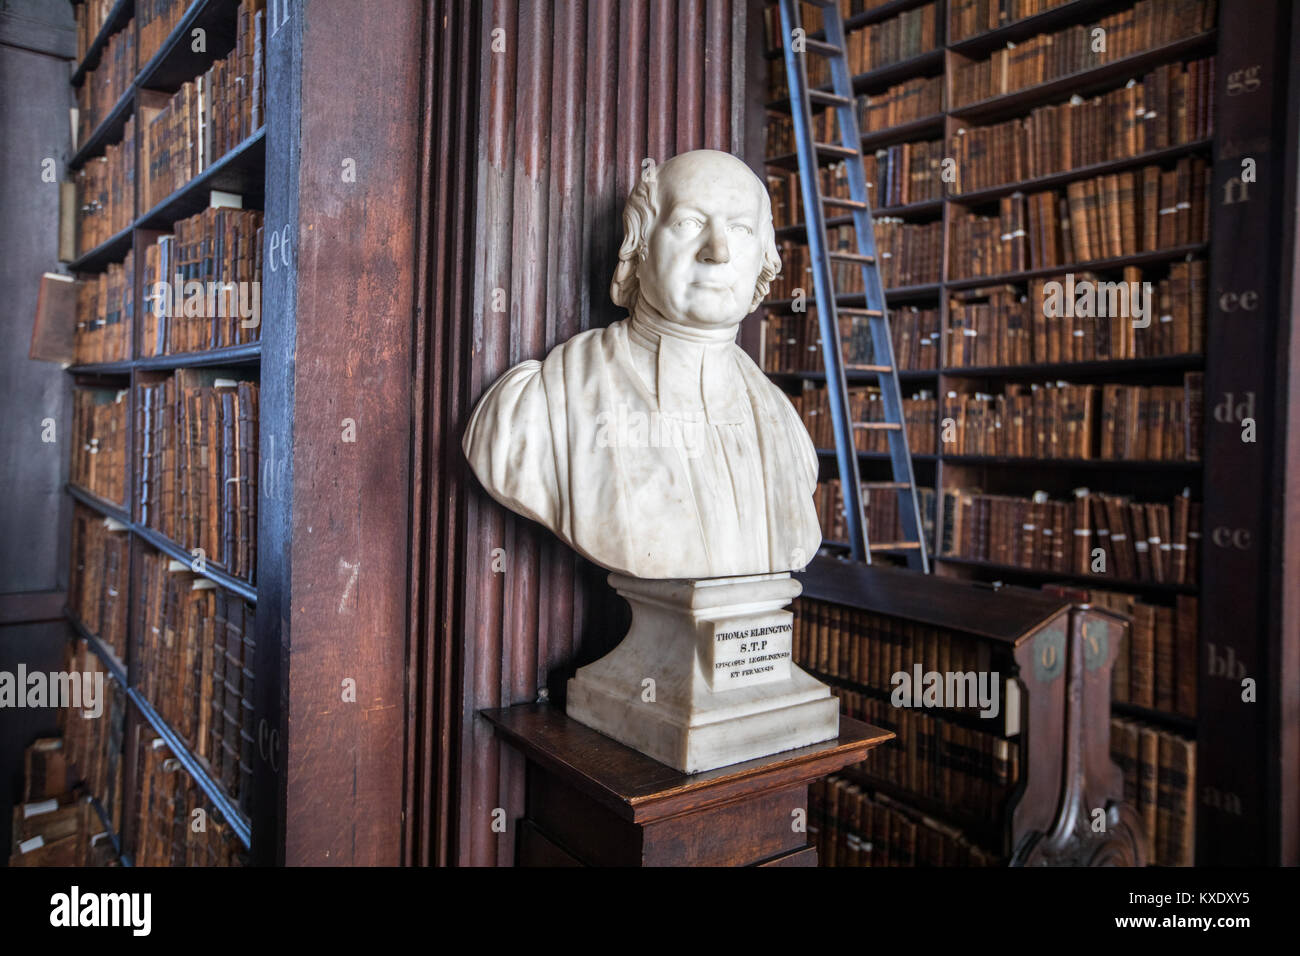 Sculpture of Thomas Elrington, Provost of Trinity College, Dublin from 1811 to 1820, The Long Room, Trinity College Library, Dublin, Ireland Stock Photo